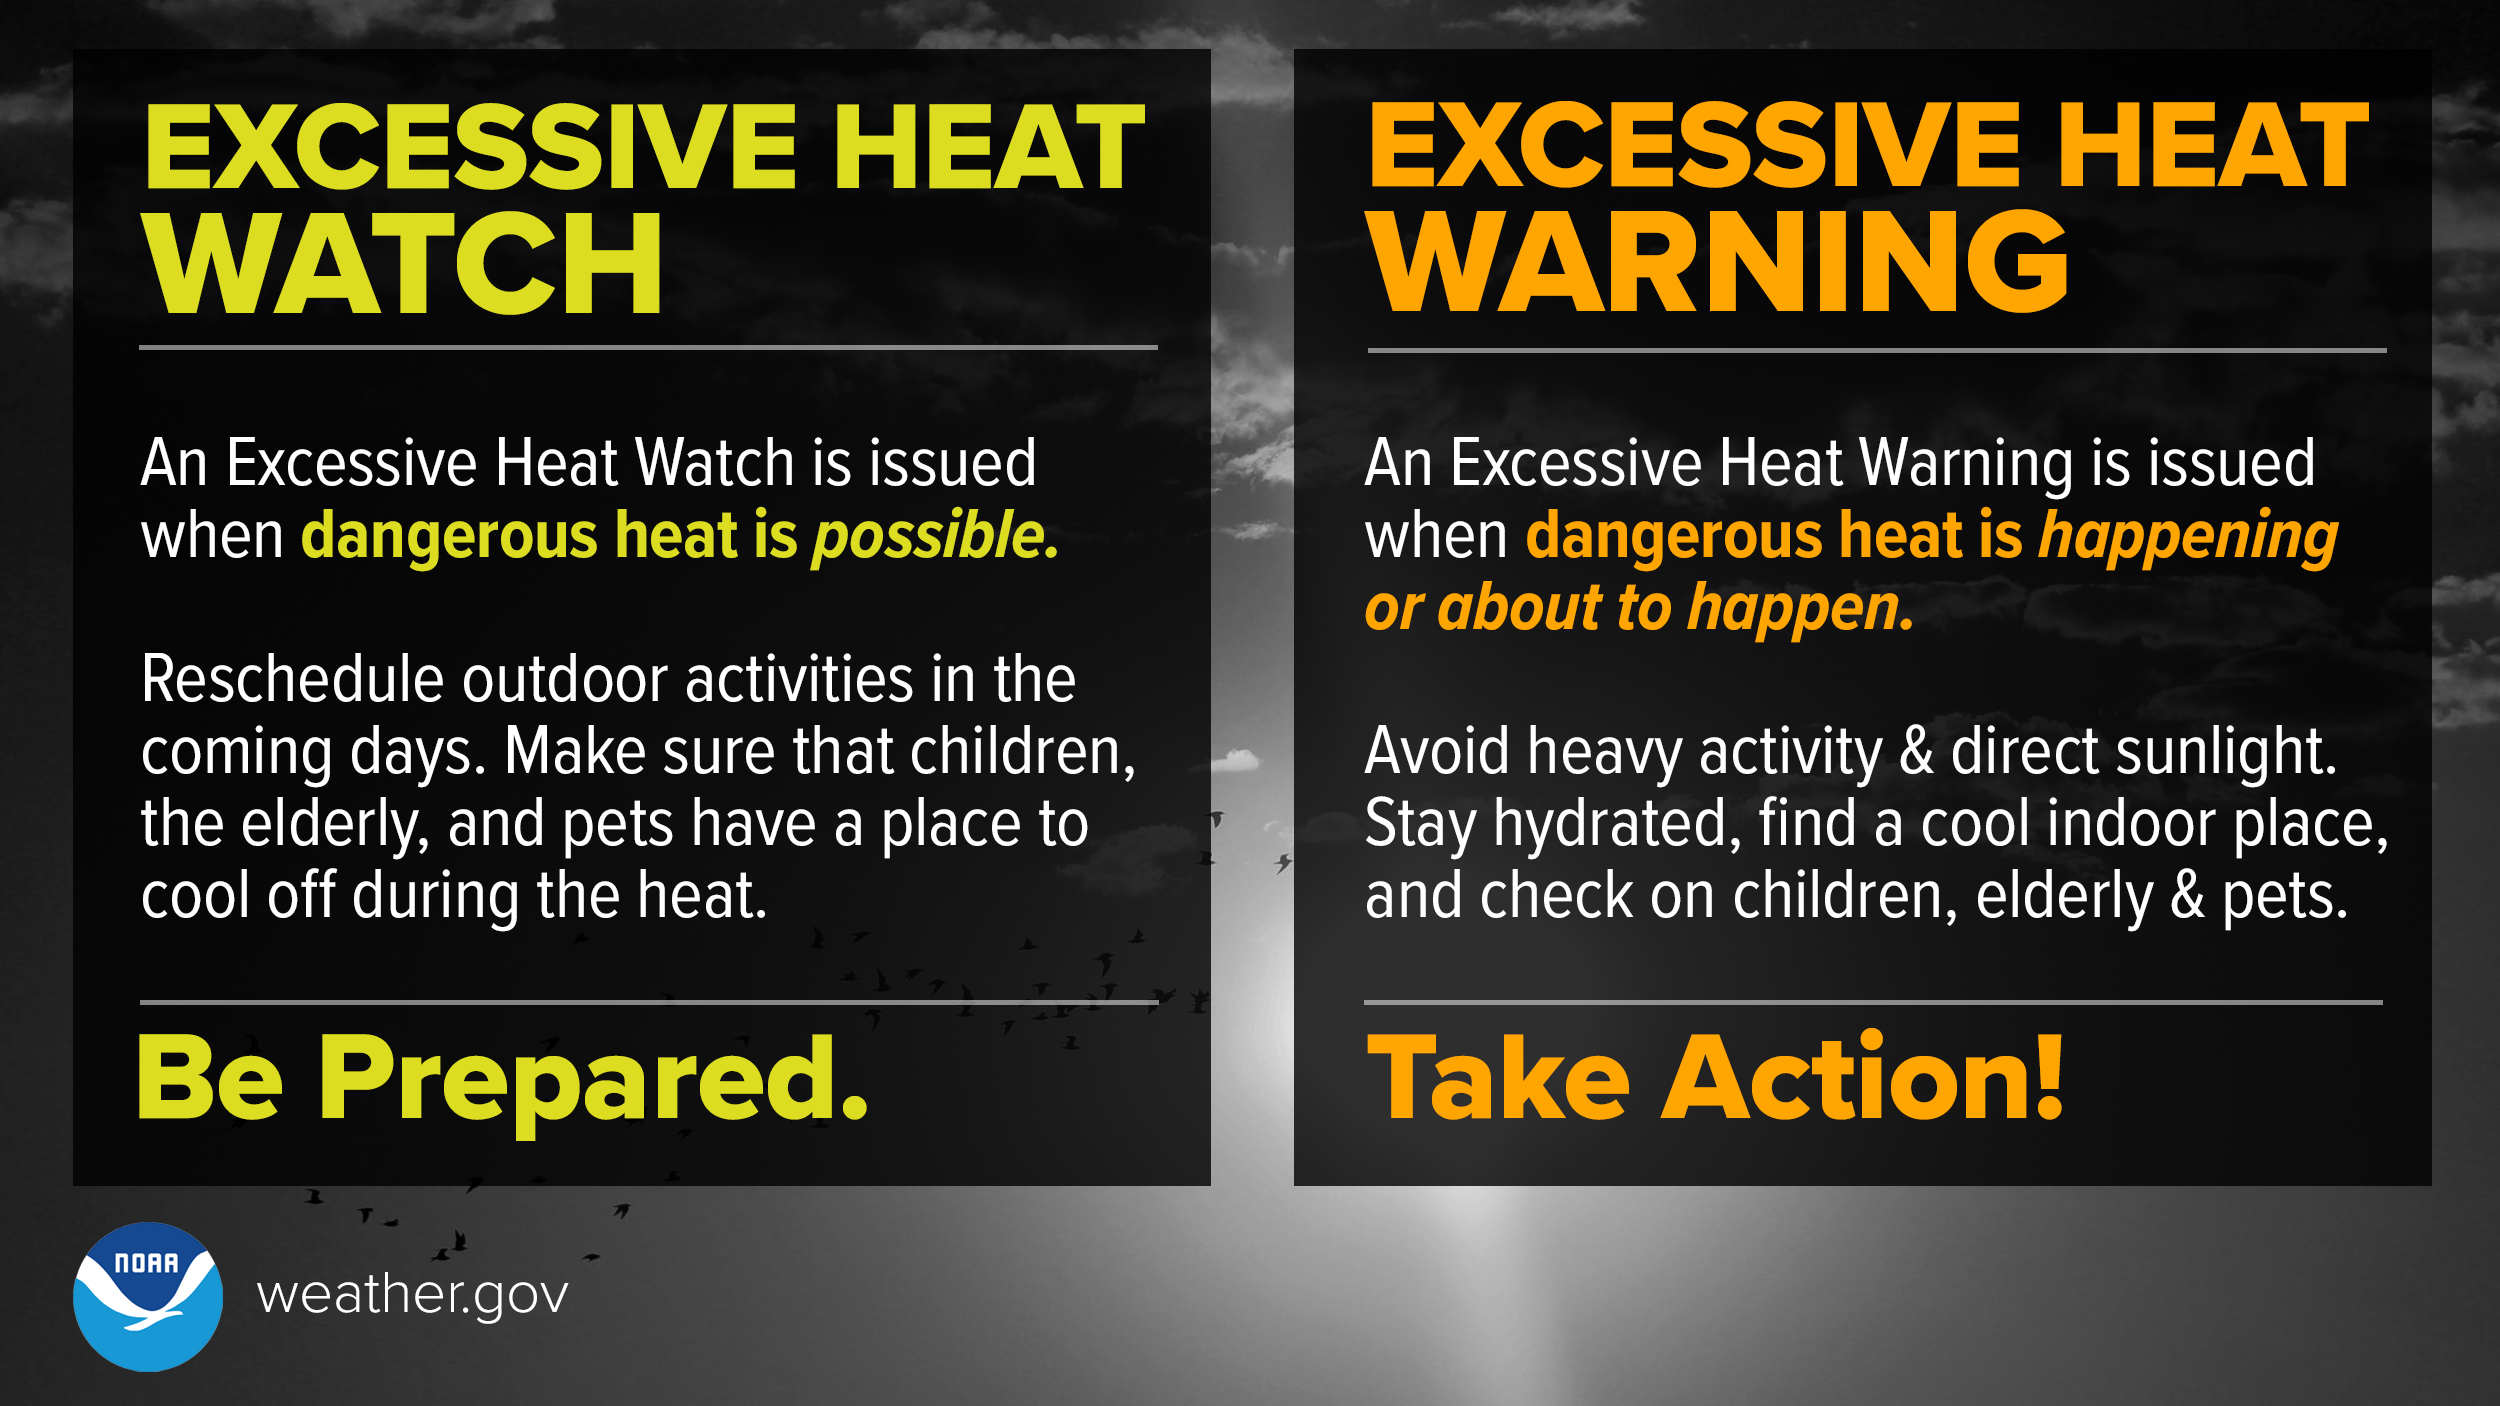 An Excessive Heat Watch means be prepared. An Excessive Heat Watch is issued when dangerous heat is possible. Reschedule outdoor activities in the coming days. Make sure that children, the elderly, and pets have a place to cool off during the heat. An Excessive Heat Warning means take action! An Excessive Heat Warning is issued when dangerous is happening or about to happen. Avoid heavy activity and direct sunlight. Stay hydrated, find a cool indoor place, and check on children, elderly & pets.